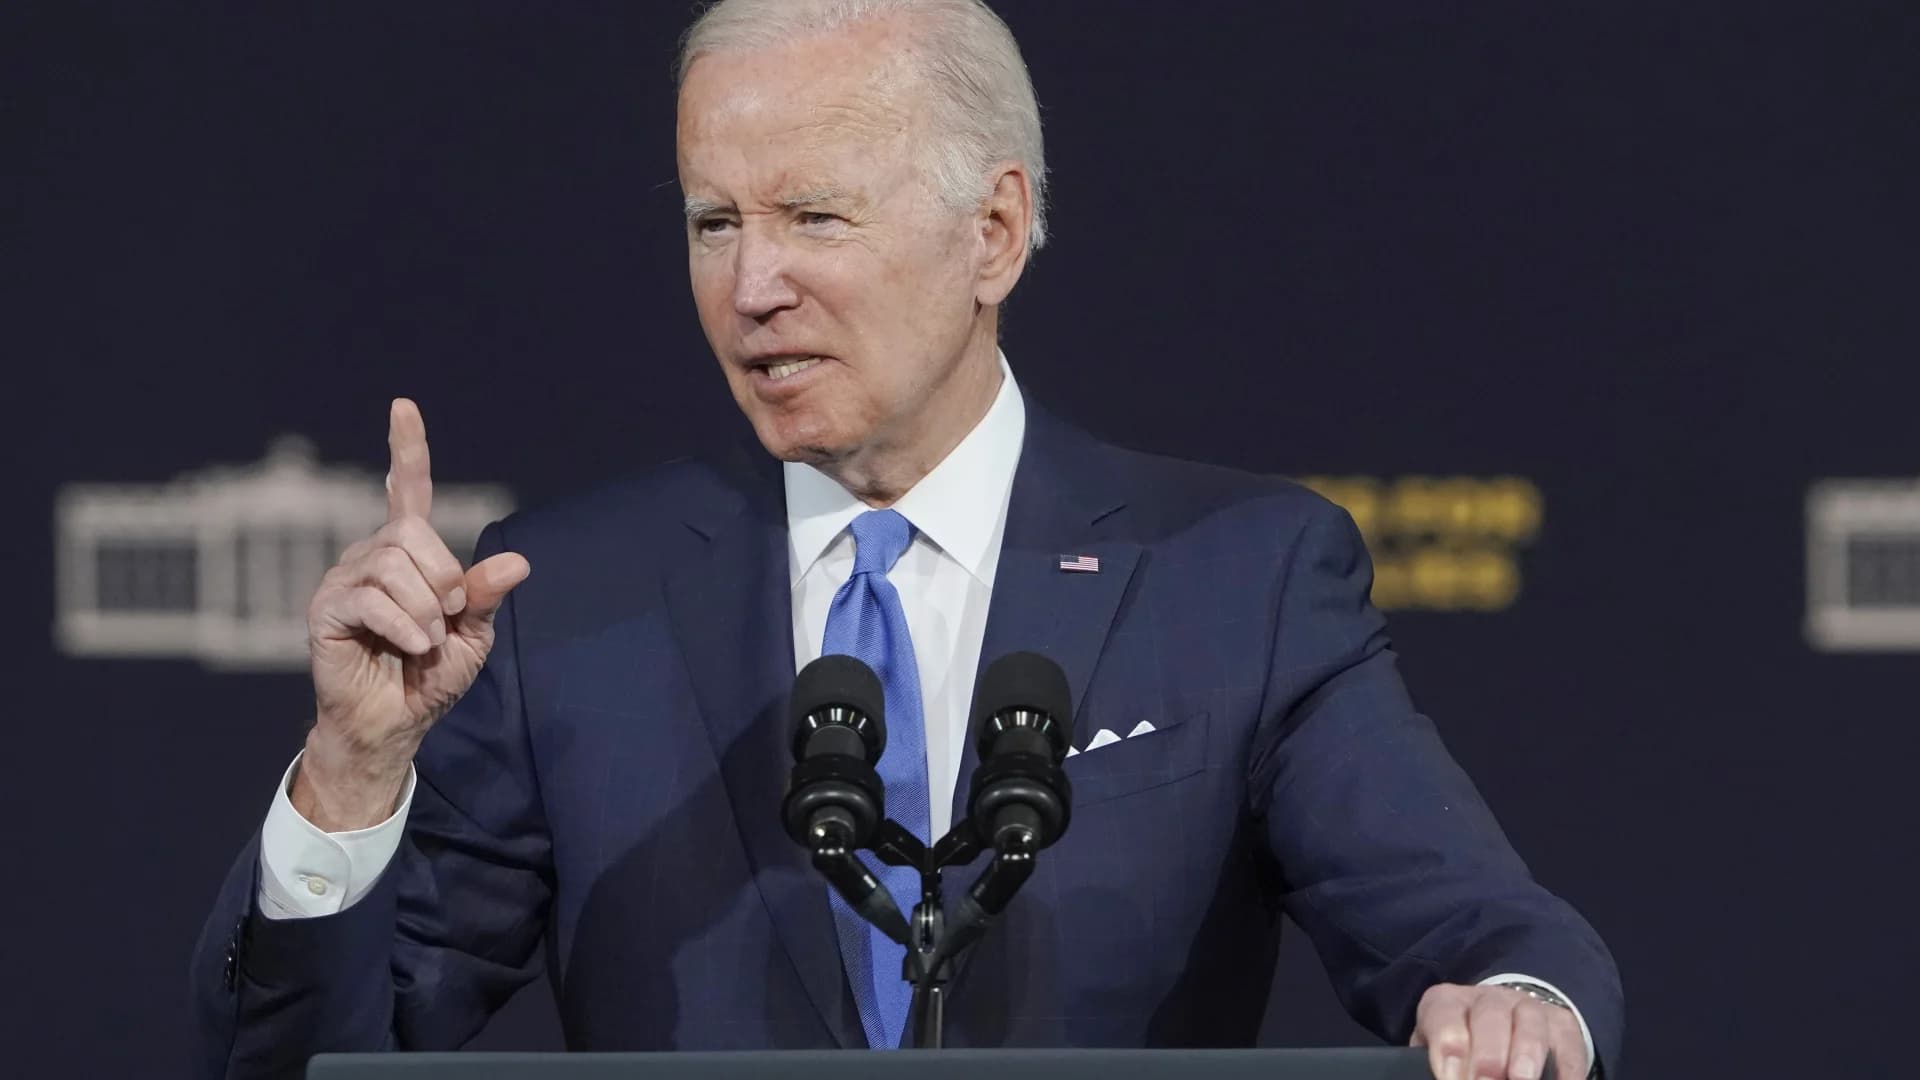 President Biden grants 1st pardons of his term to former Secret Service agent and 2 others